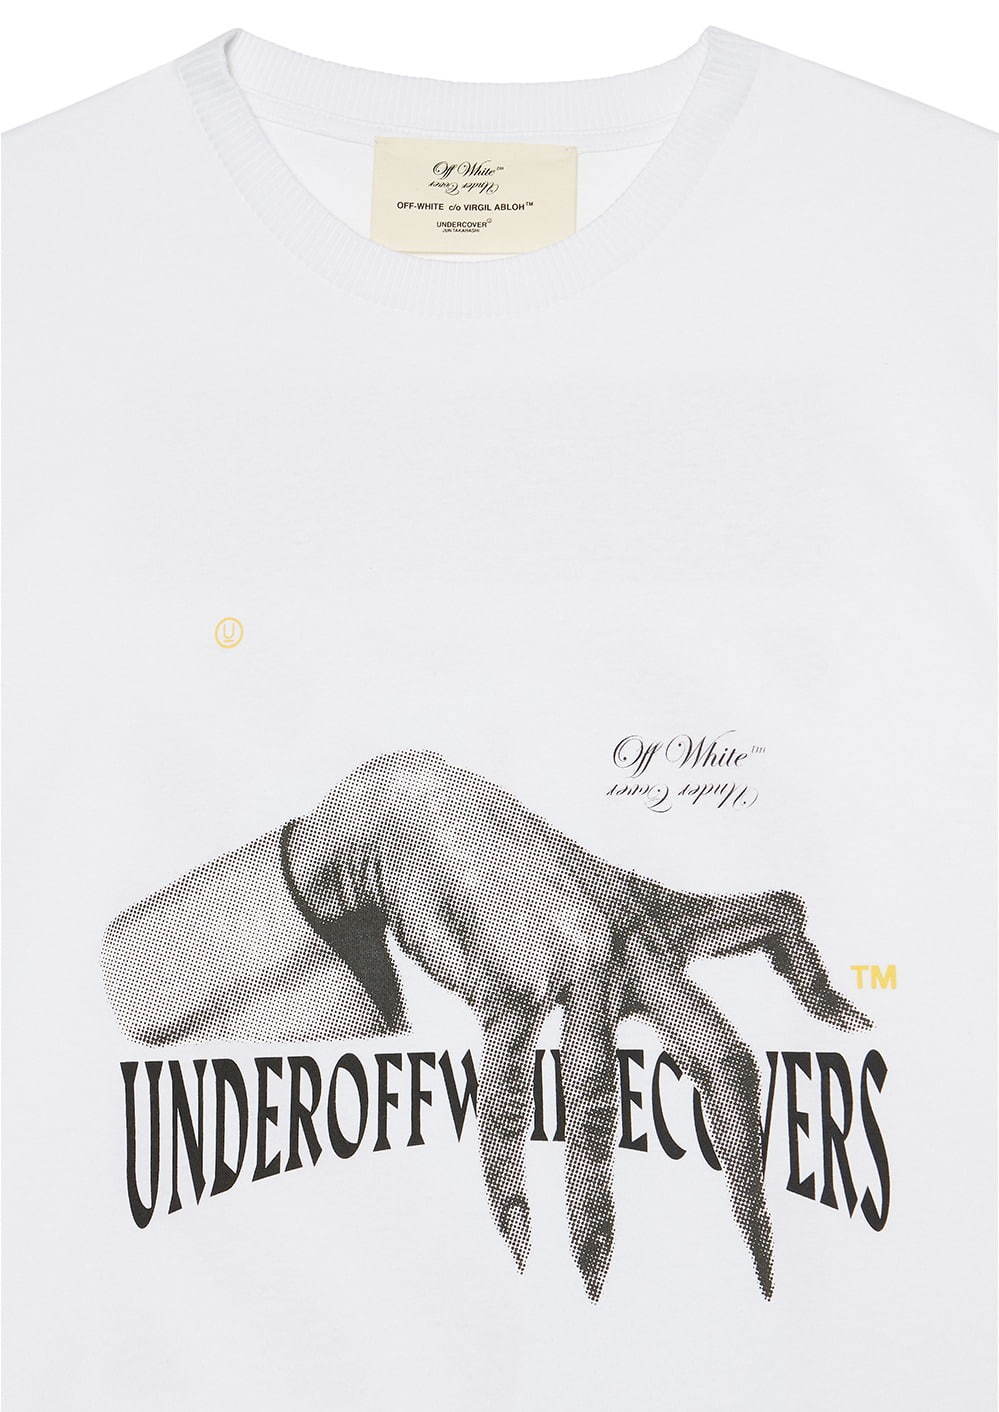 UNDERCOVER × OFF-WHITE Tシャツ